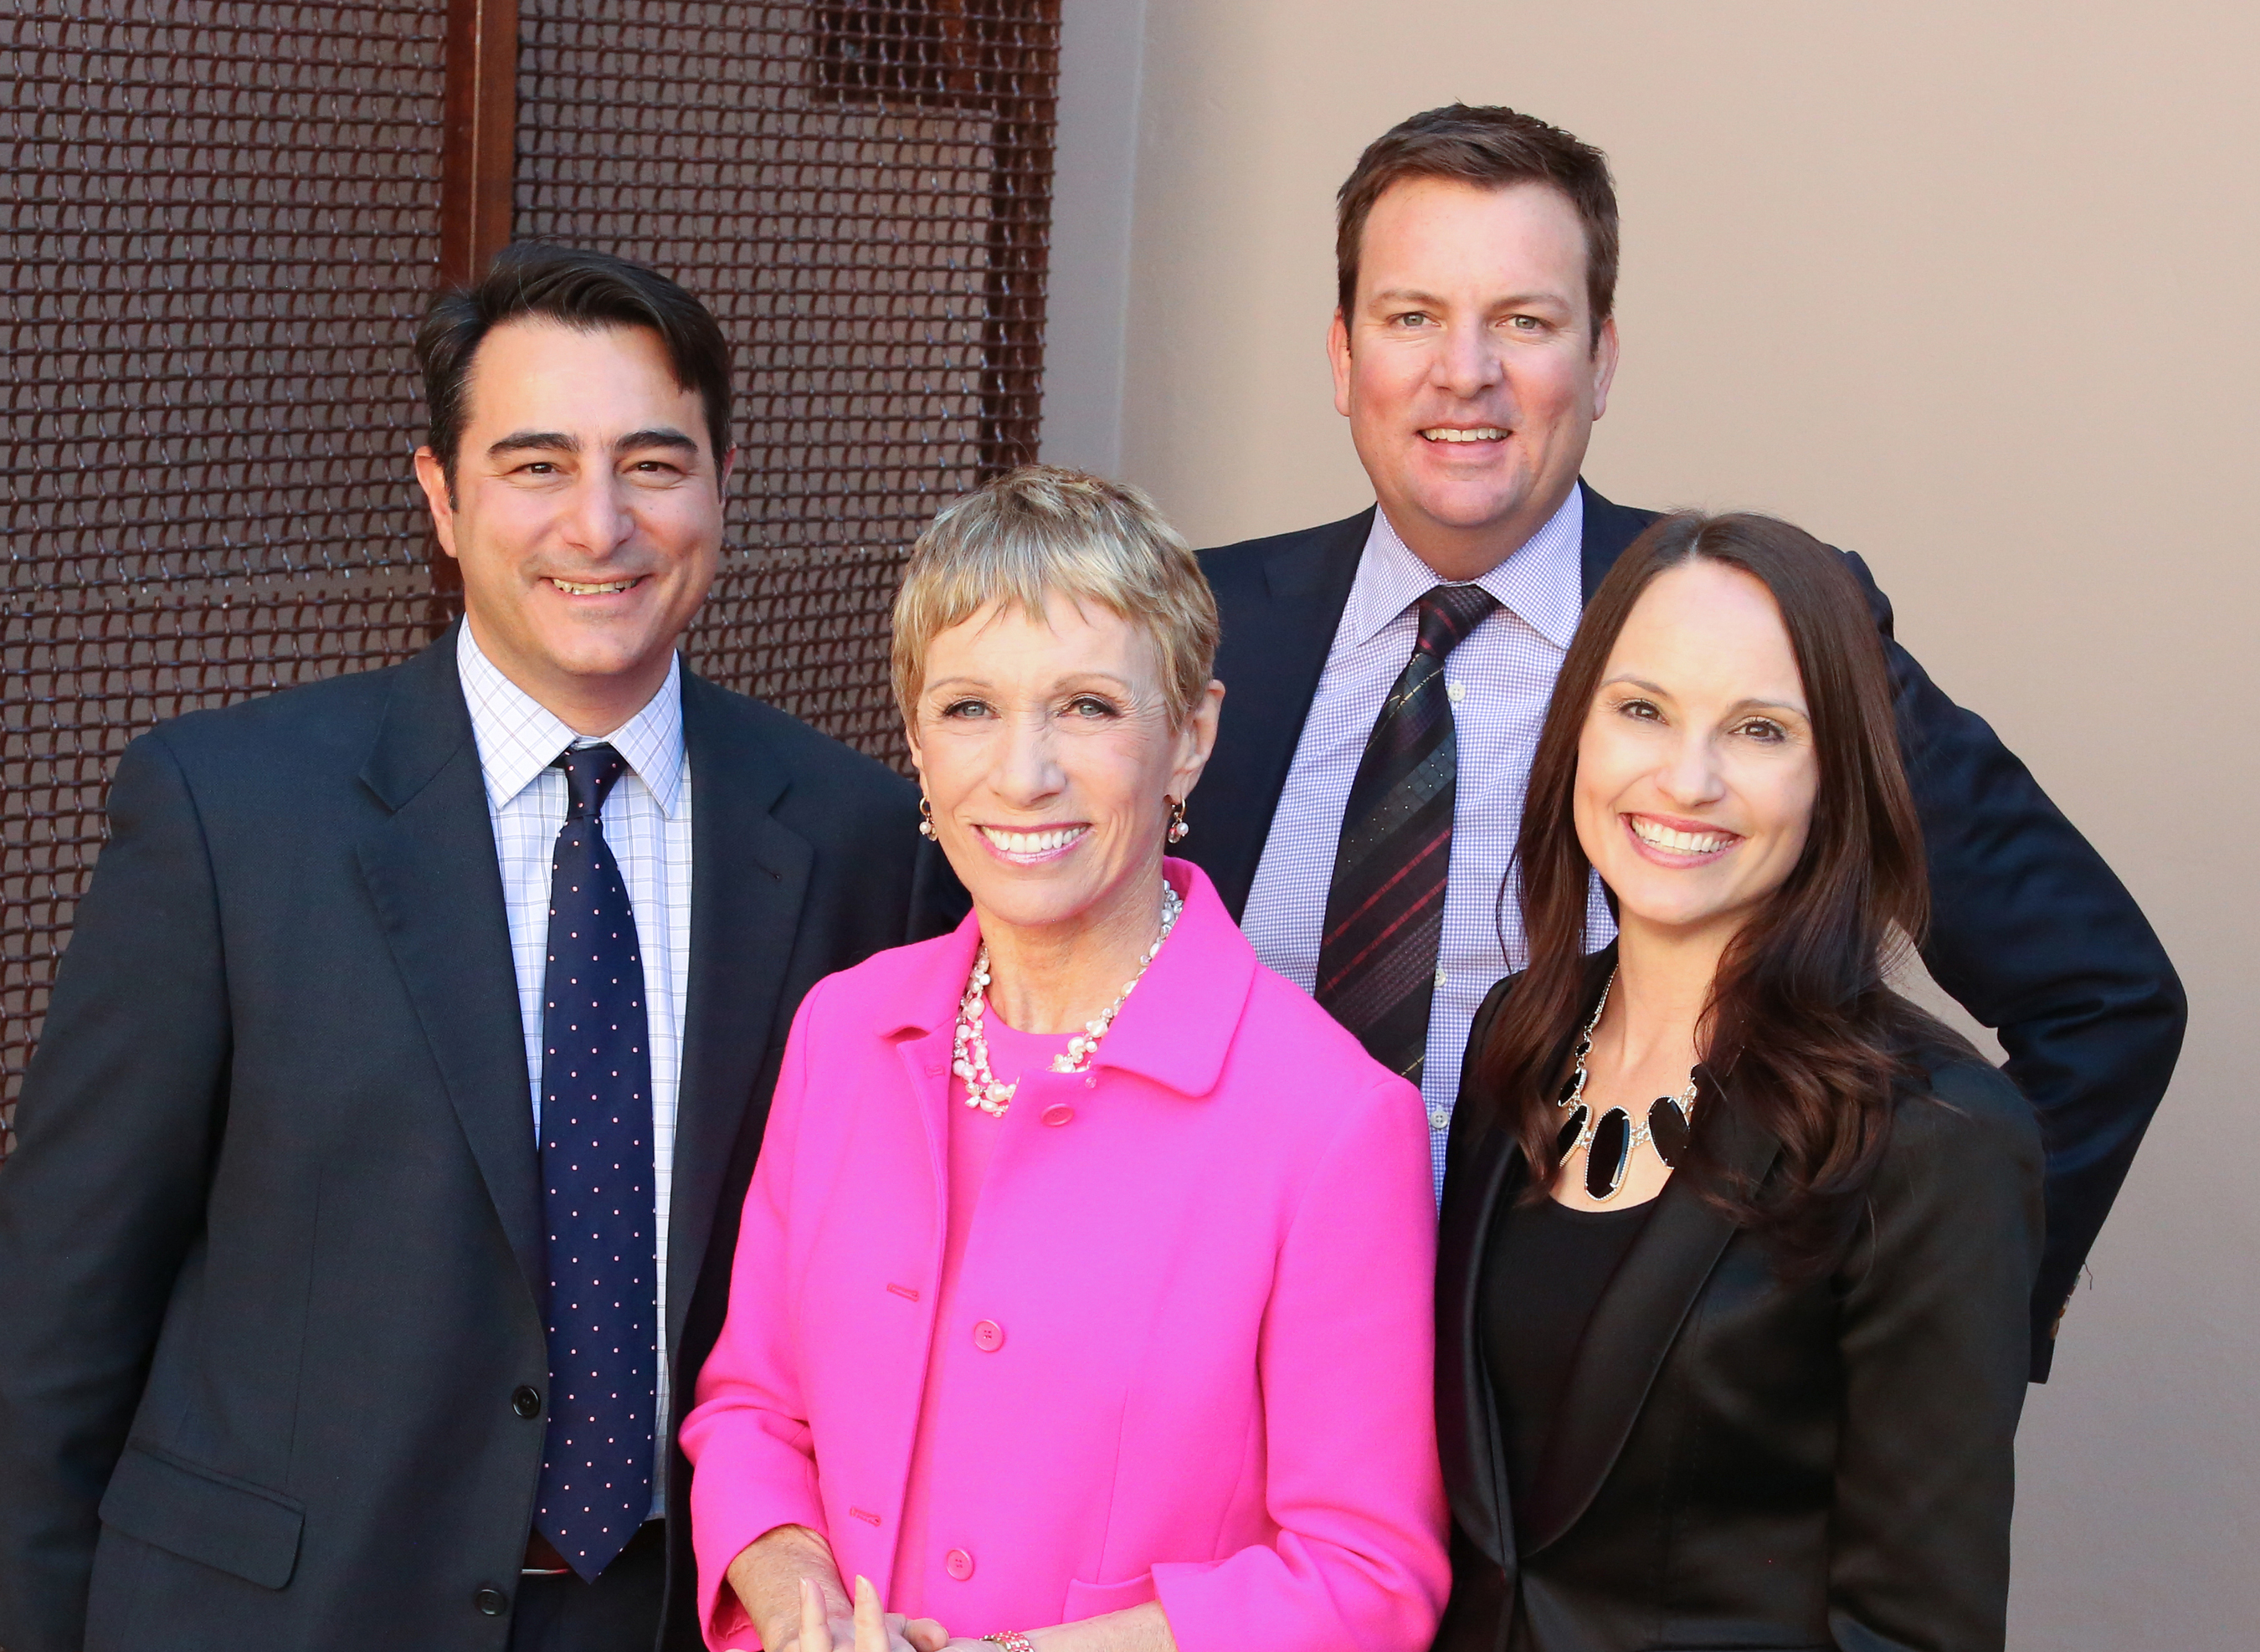 Concierge Auctions, a luxury real estate auction firm serving high-net-worth individuals worldwide, today announced that Barbara Corcoran has joined the organization as a Strategic Advisor. (PRNewsFoto/Concierge Auctions)